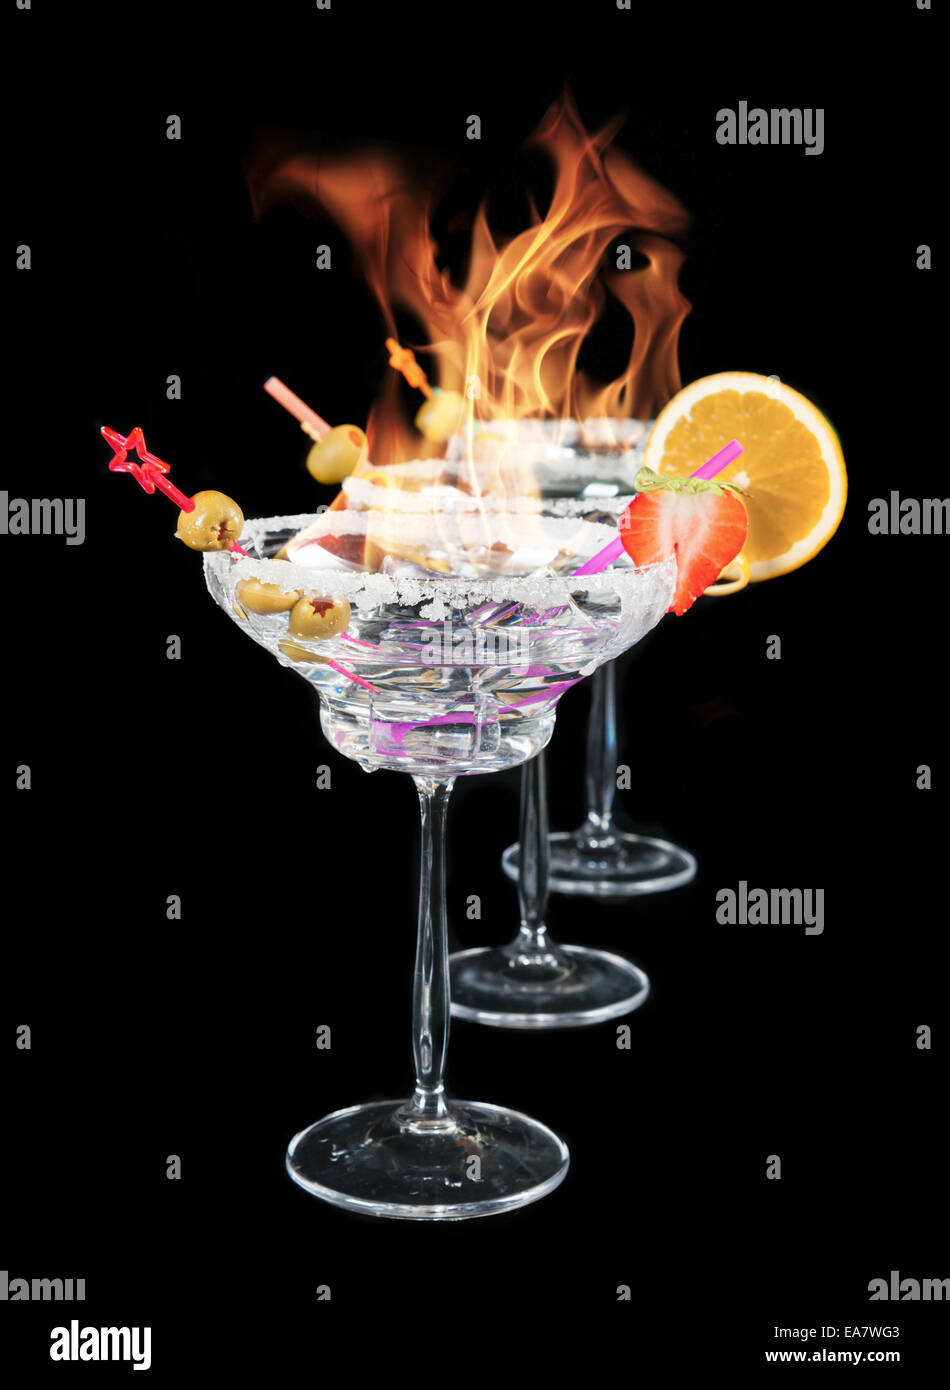 Glasses of alcohol cocktails burning on top, isolated on black background Stock Photo